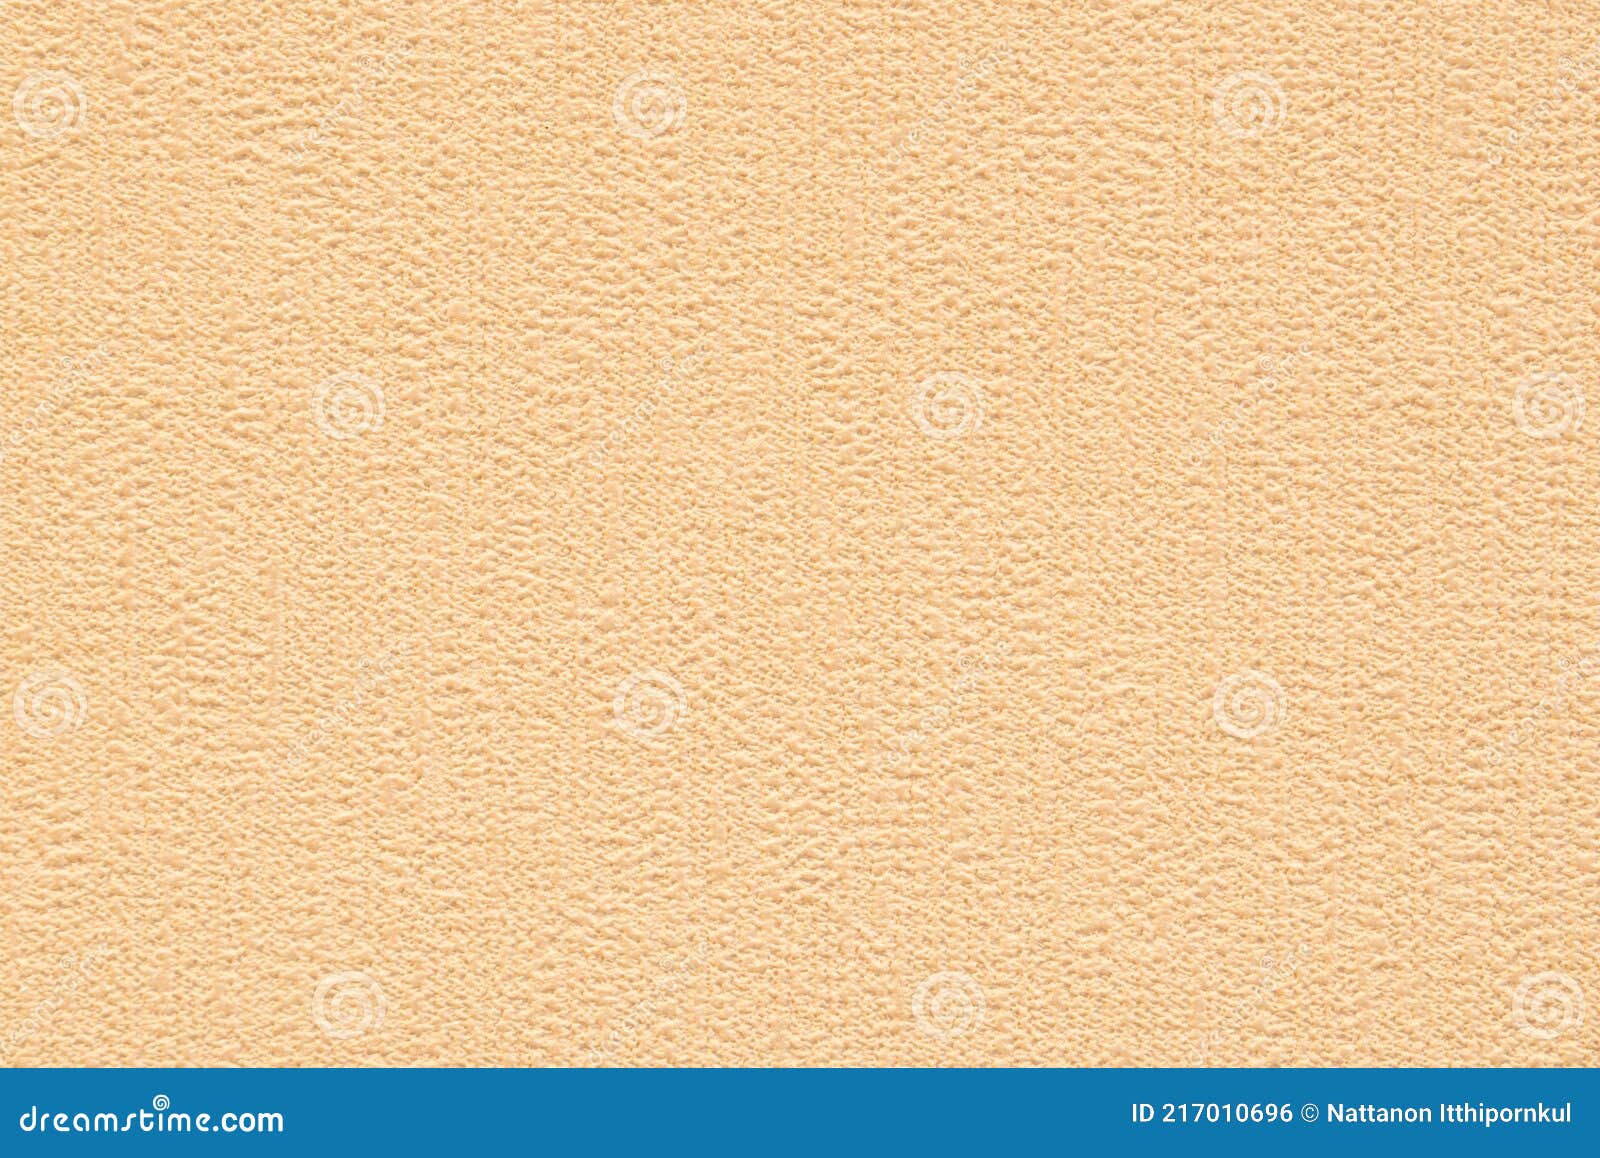 Rough Cream Color Texture Background Stock Photo - Image of texture,  textures: 217010696